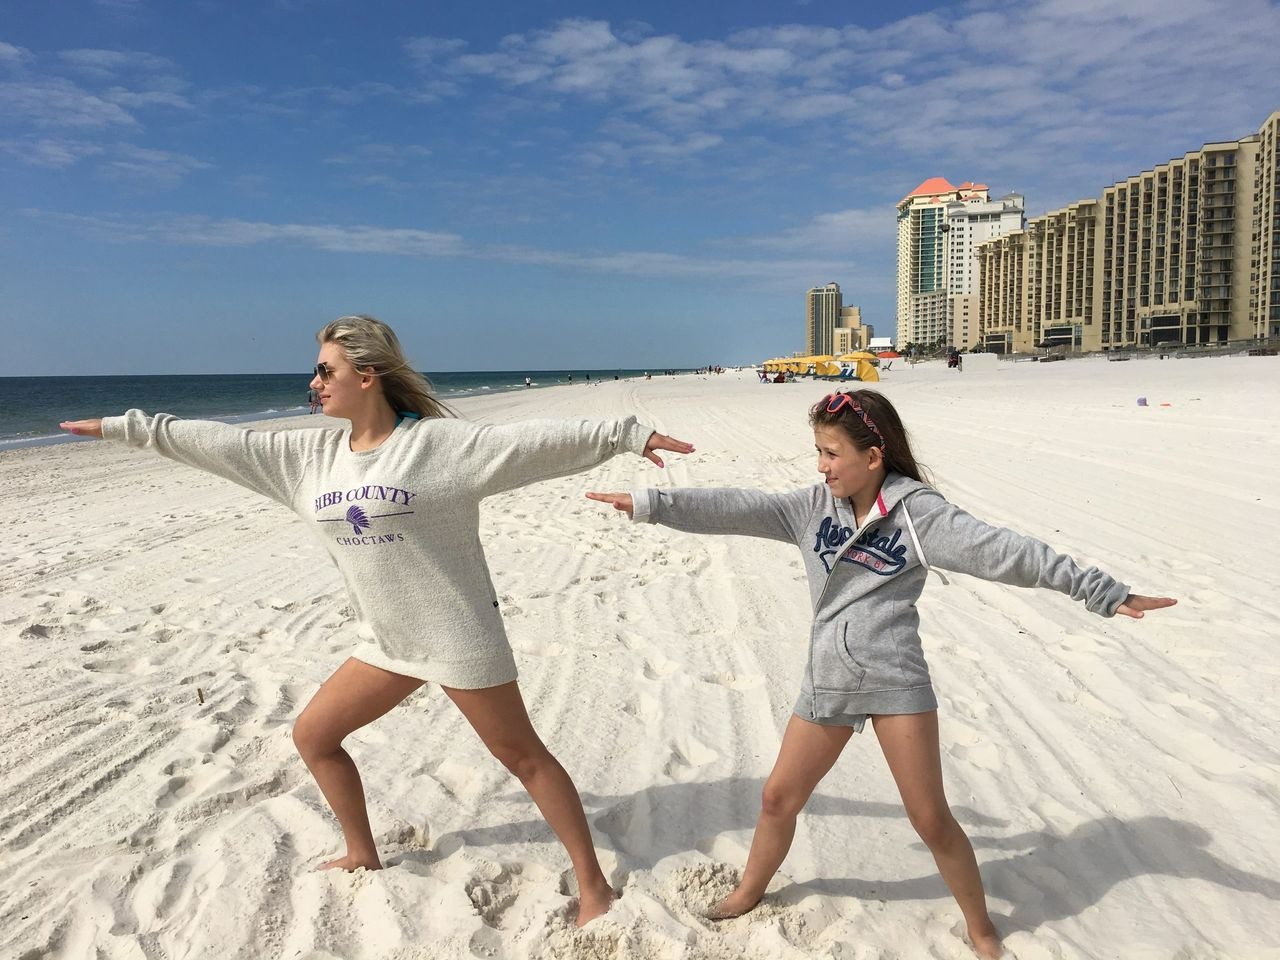 Two women are on the beach with their arms outstretched.